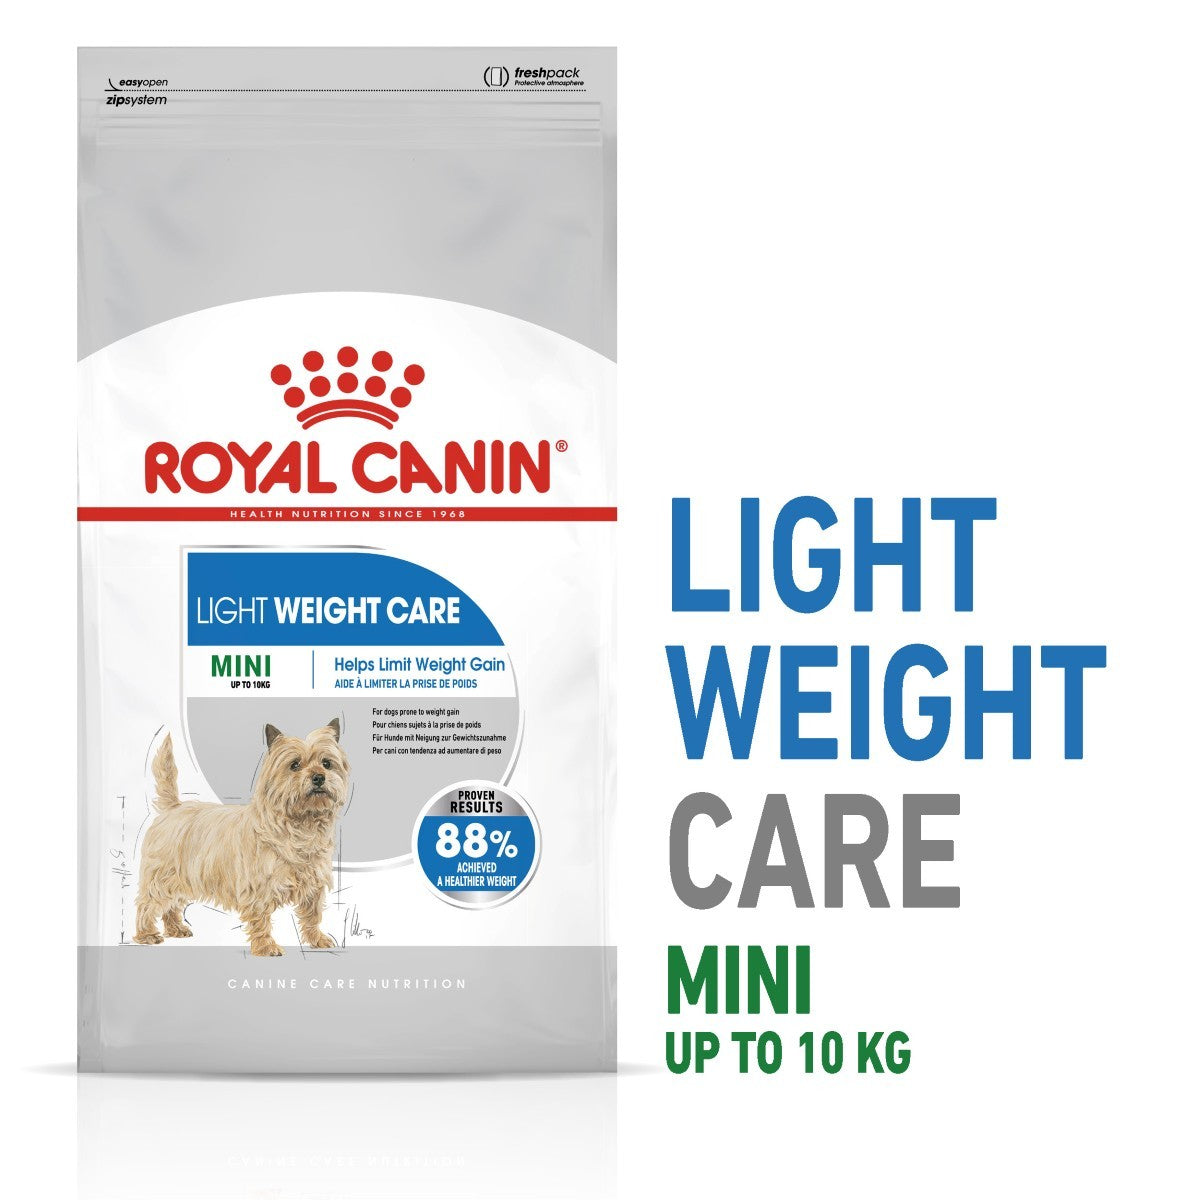 royal canin small weight care